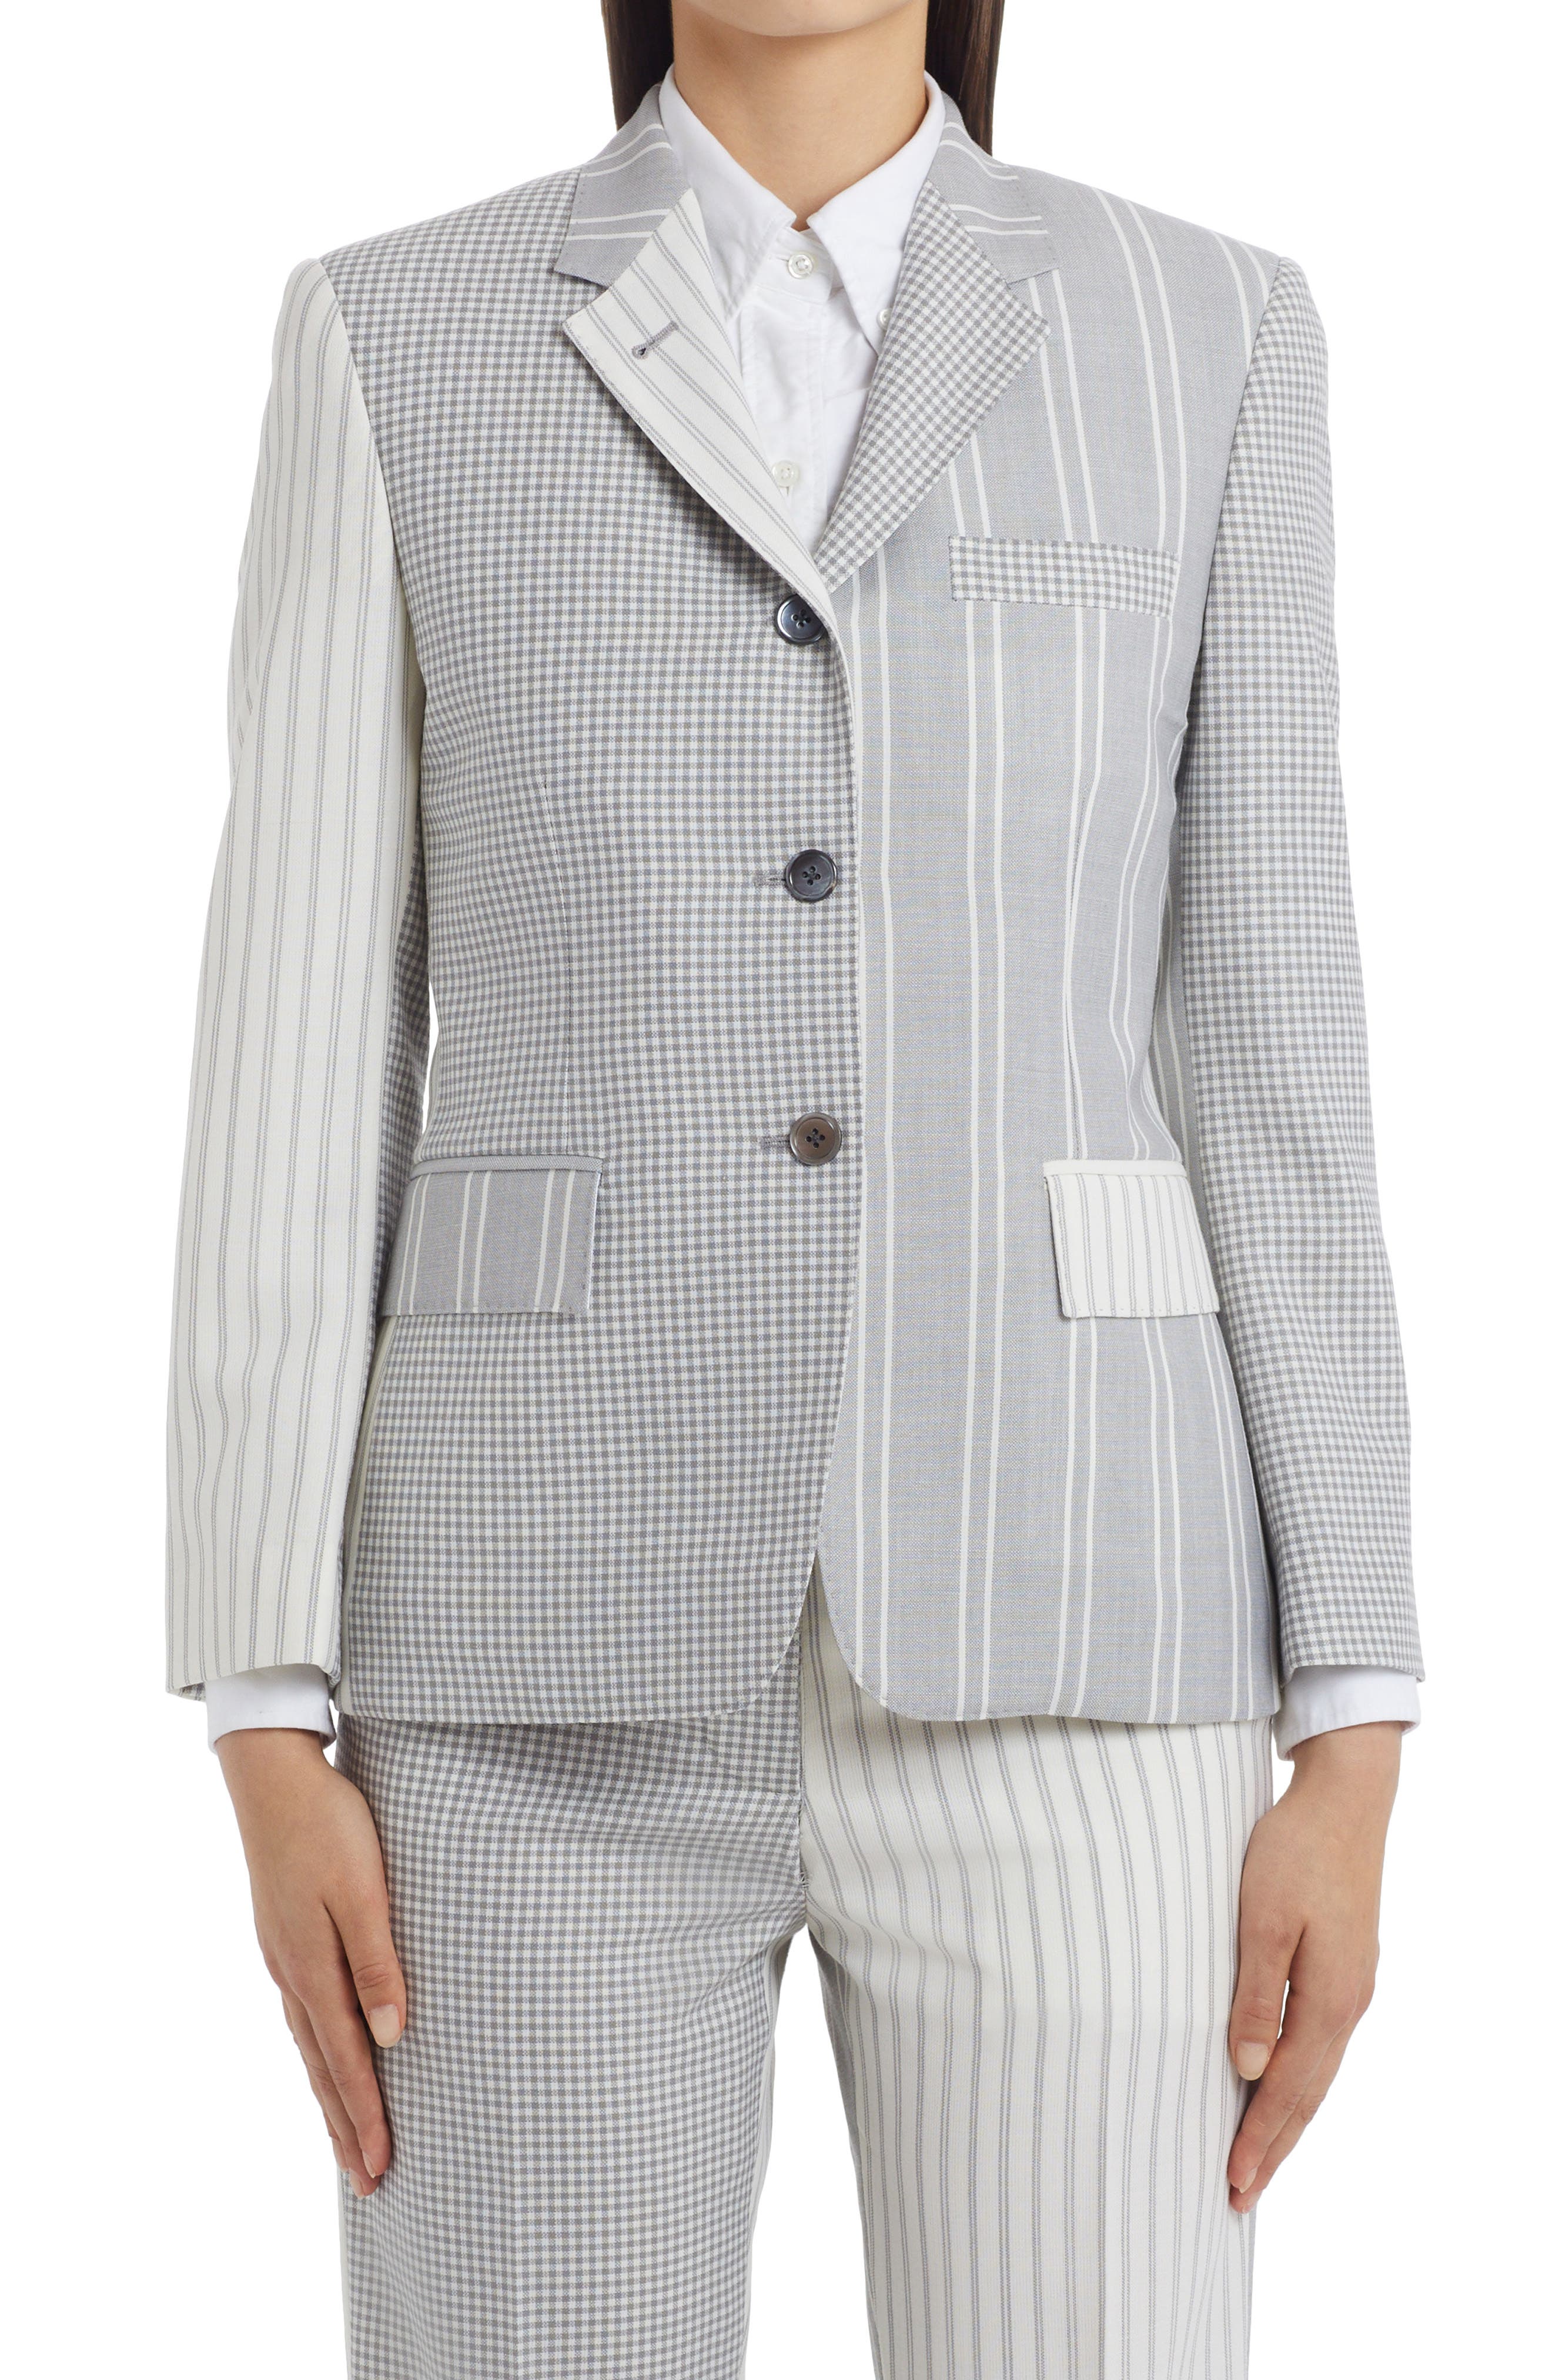 Thom Browne Mixed Print Wool Hopsack Classic Blazer in Med Grey